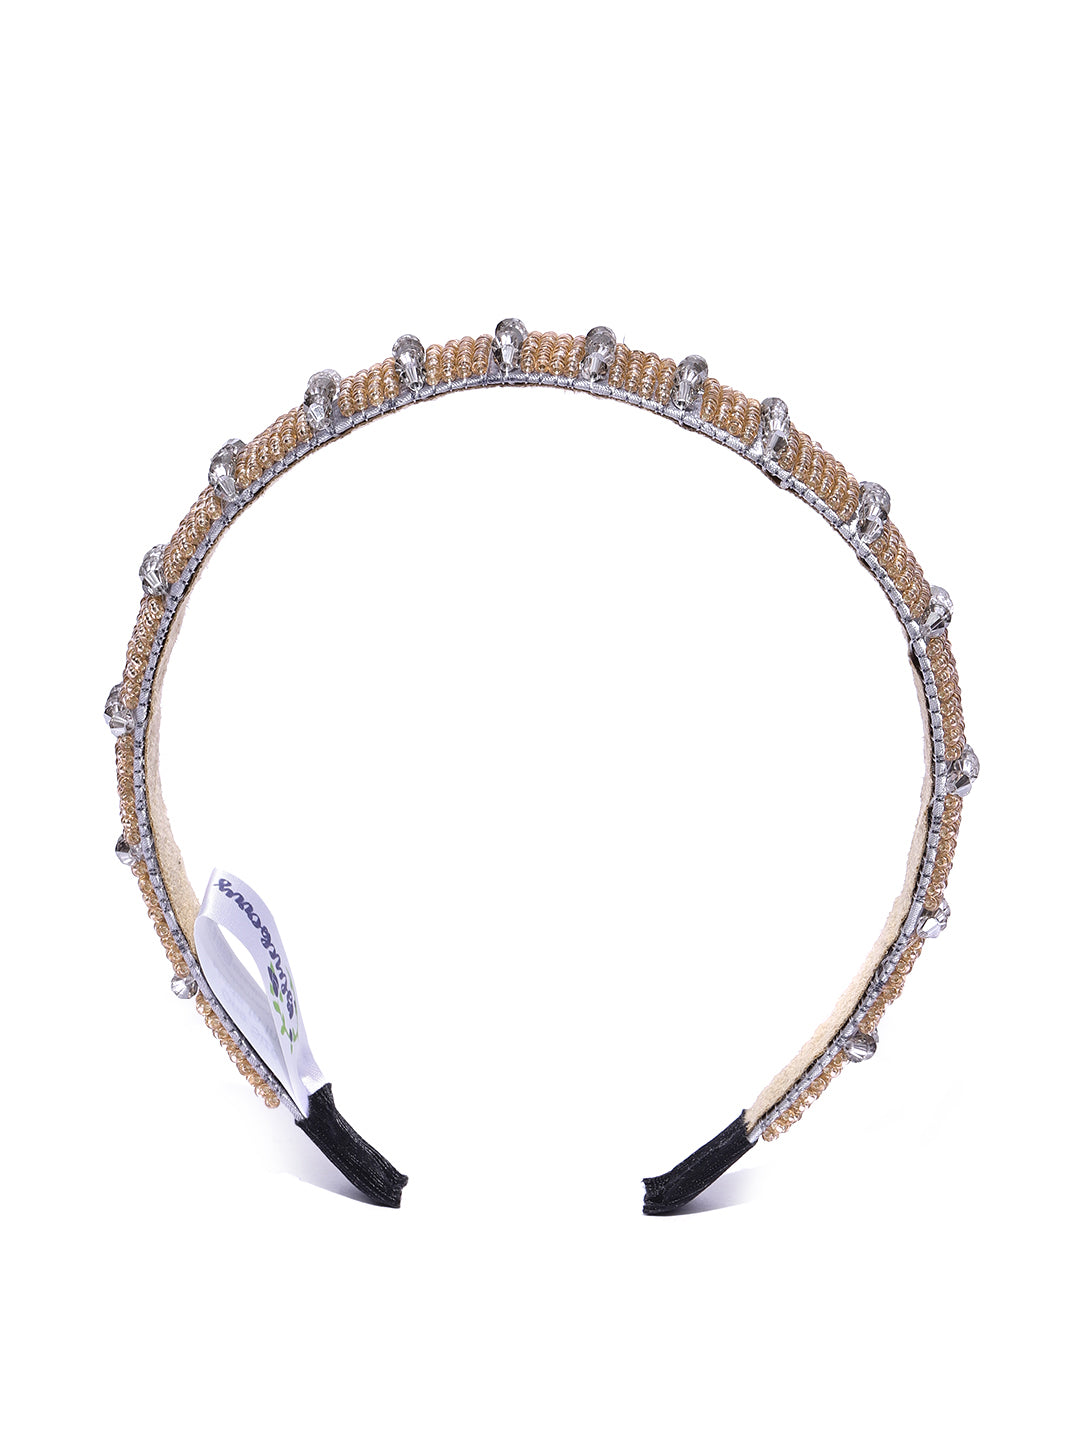 Blueberry golden and grey precious beads detailed hair band